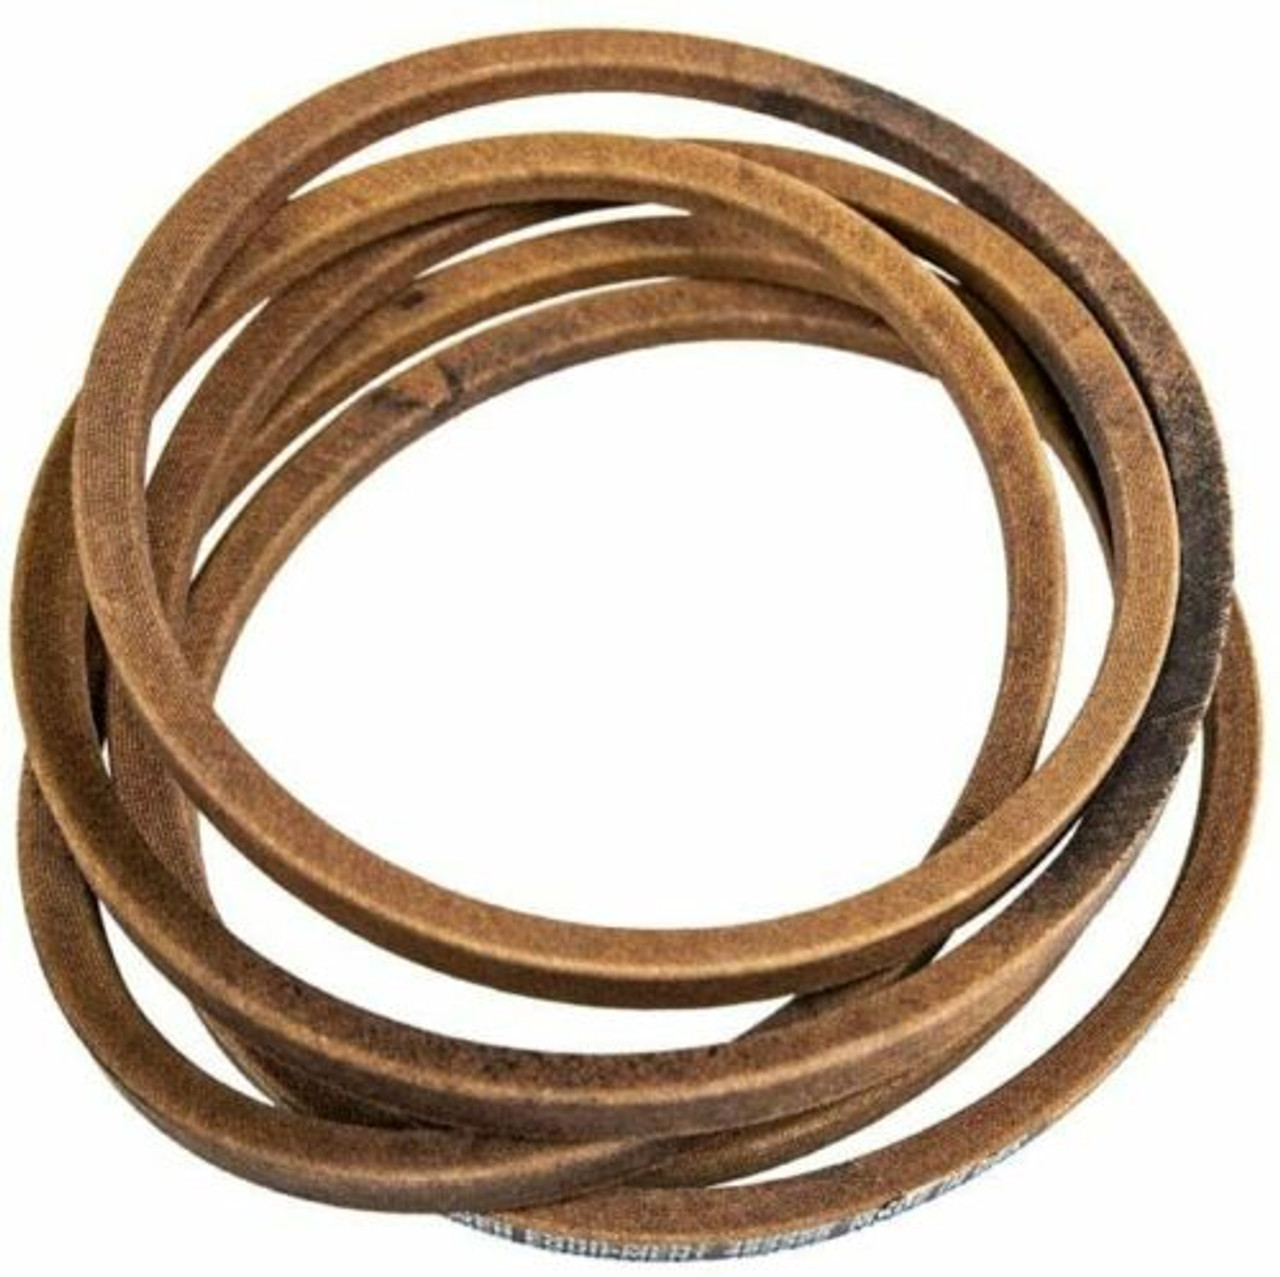 Scag OEM Replacement Belt 483325 5/8x141 1/8, Freedom Z with 48 Deck